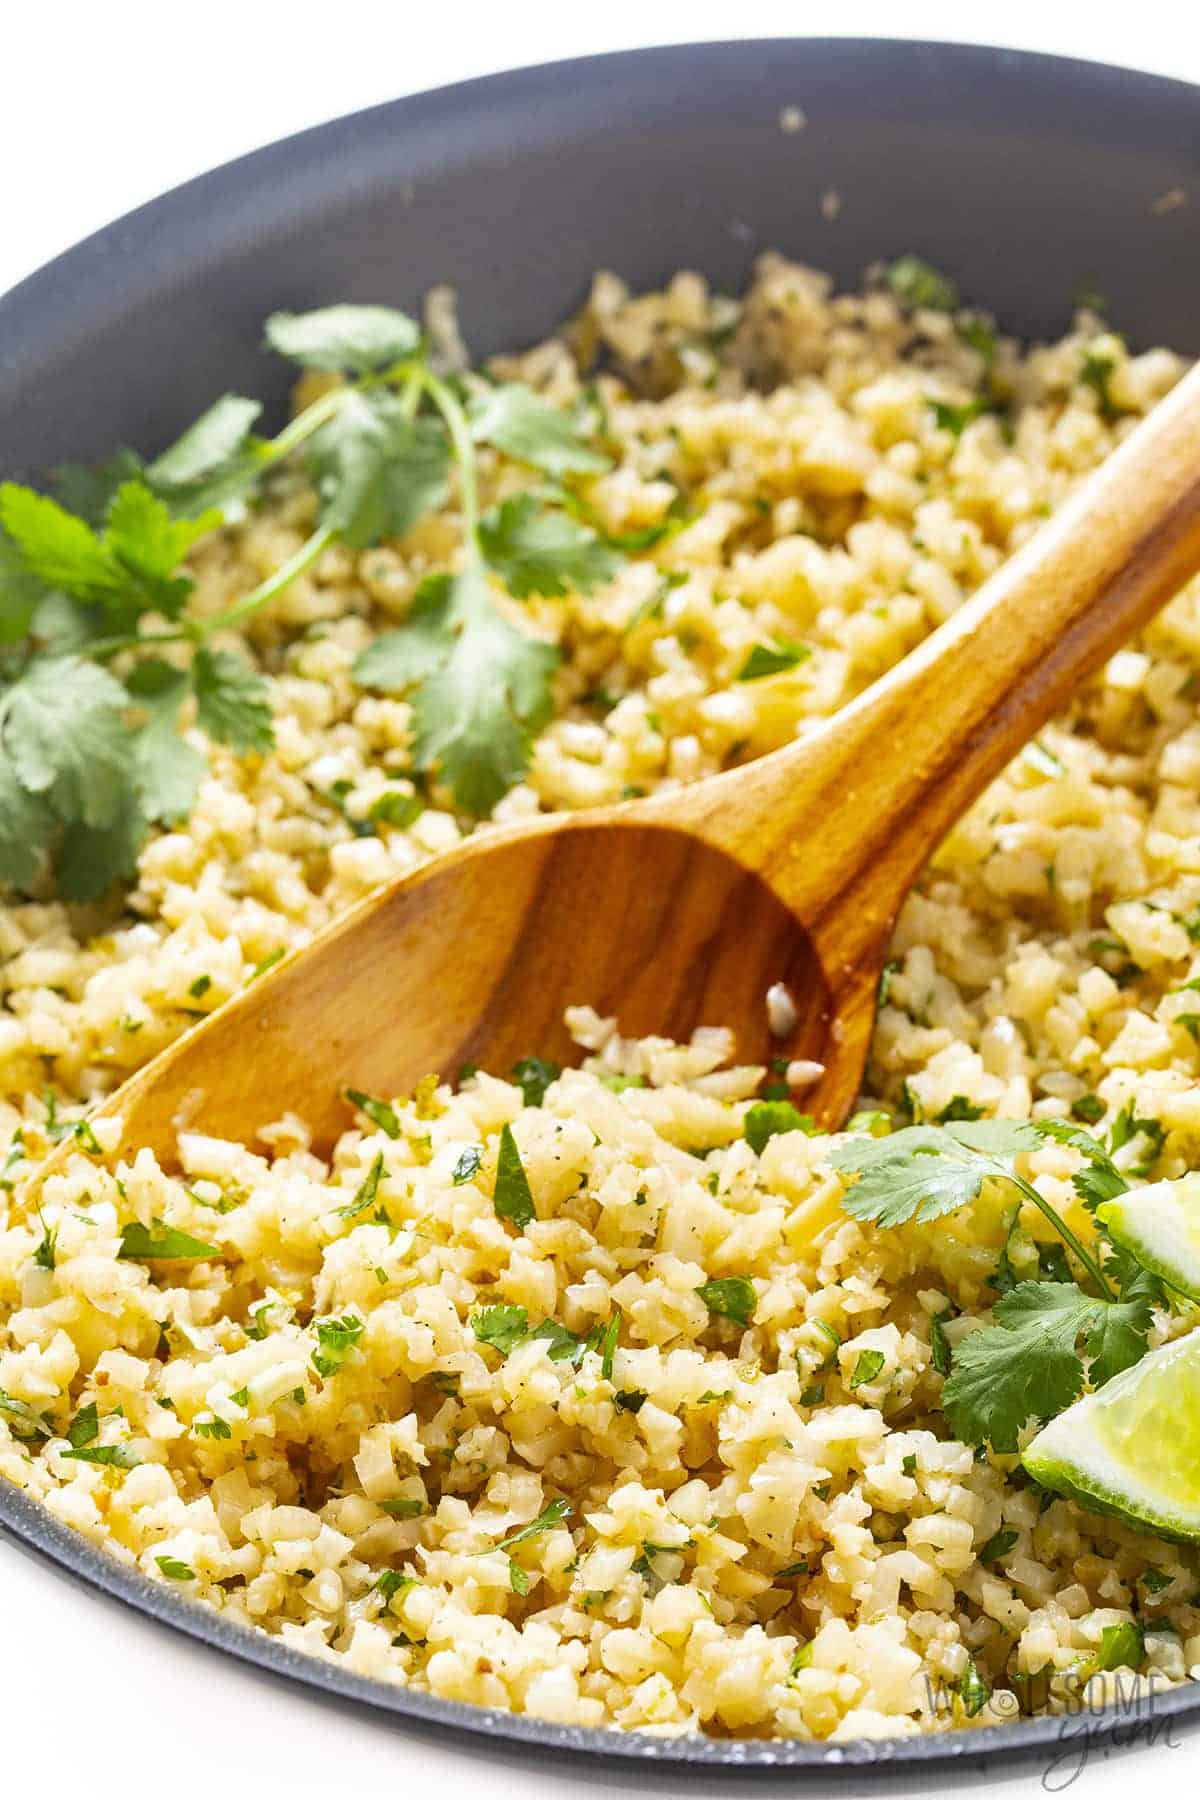 Cilantro lime cauliflower rice in a pan with wooden spoon